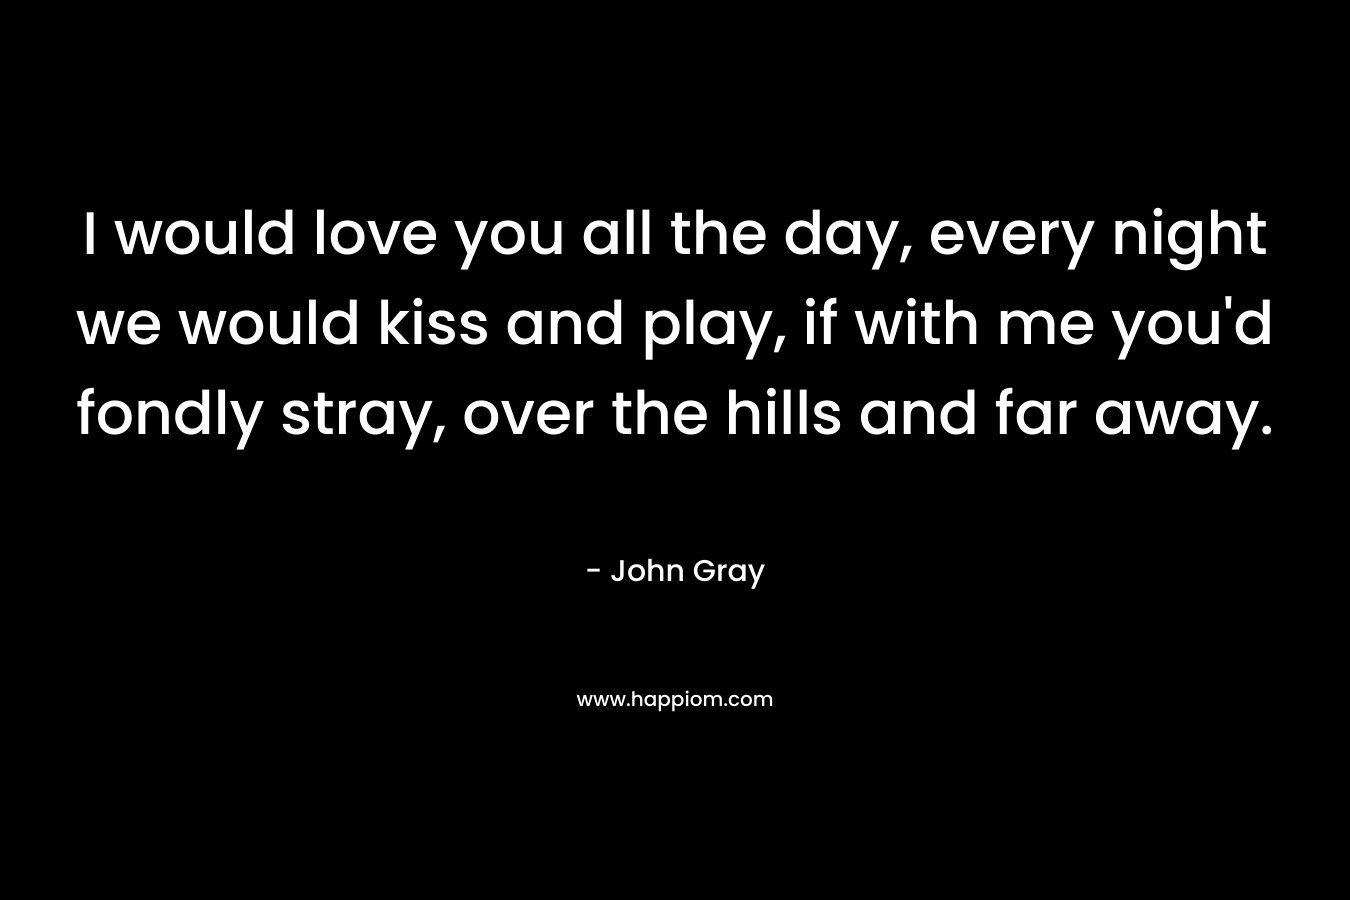 I would love you all the day, every night we would kiss and play, if with me you’d fondly stray, over the hills and far away. – John Gray